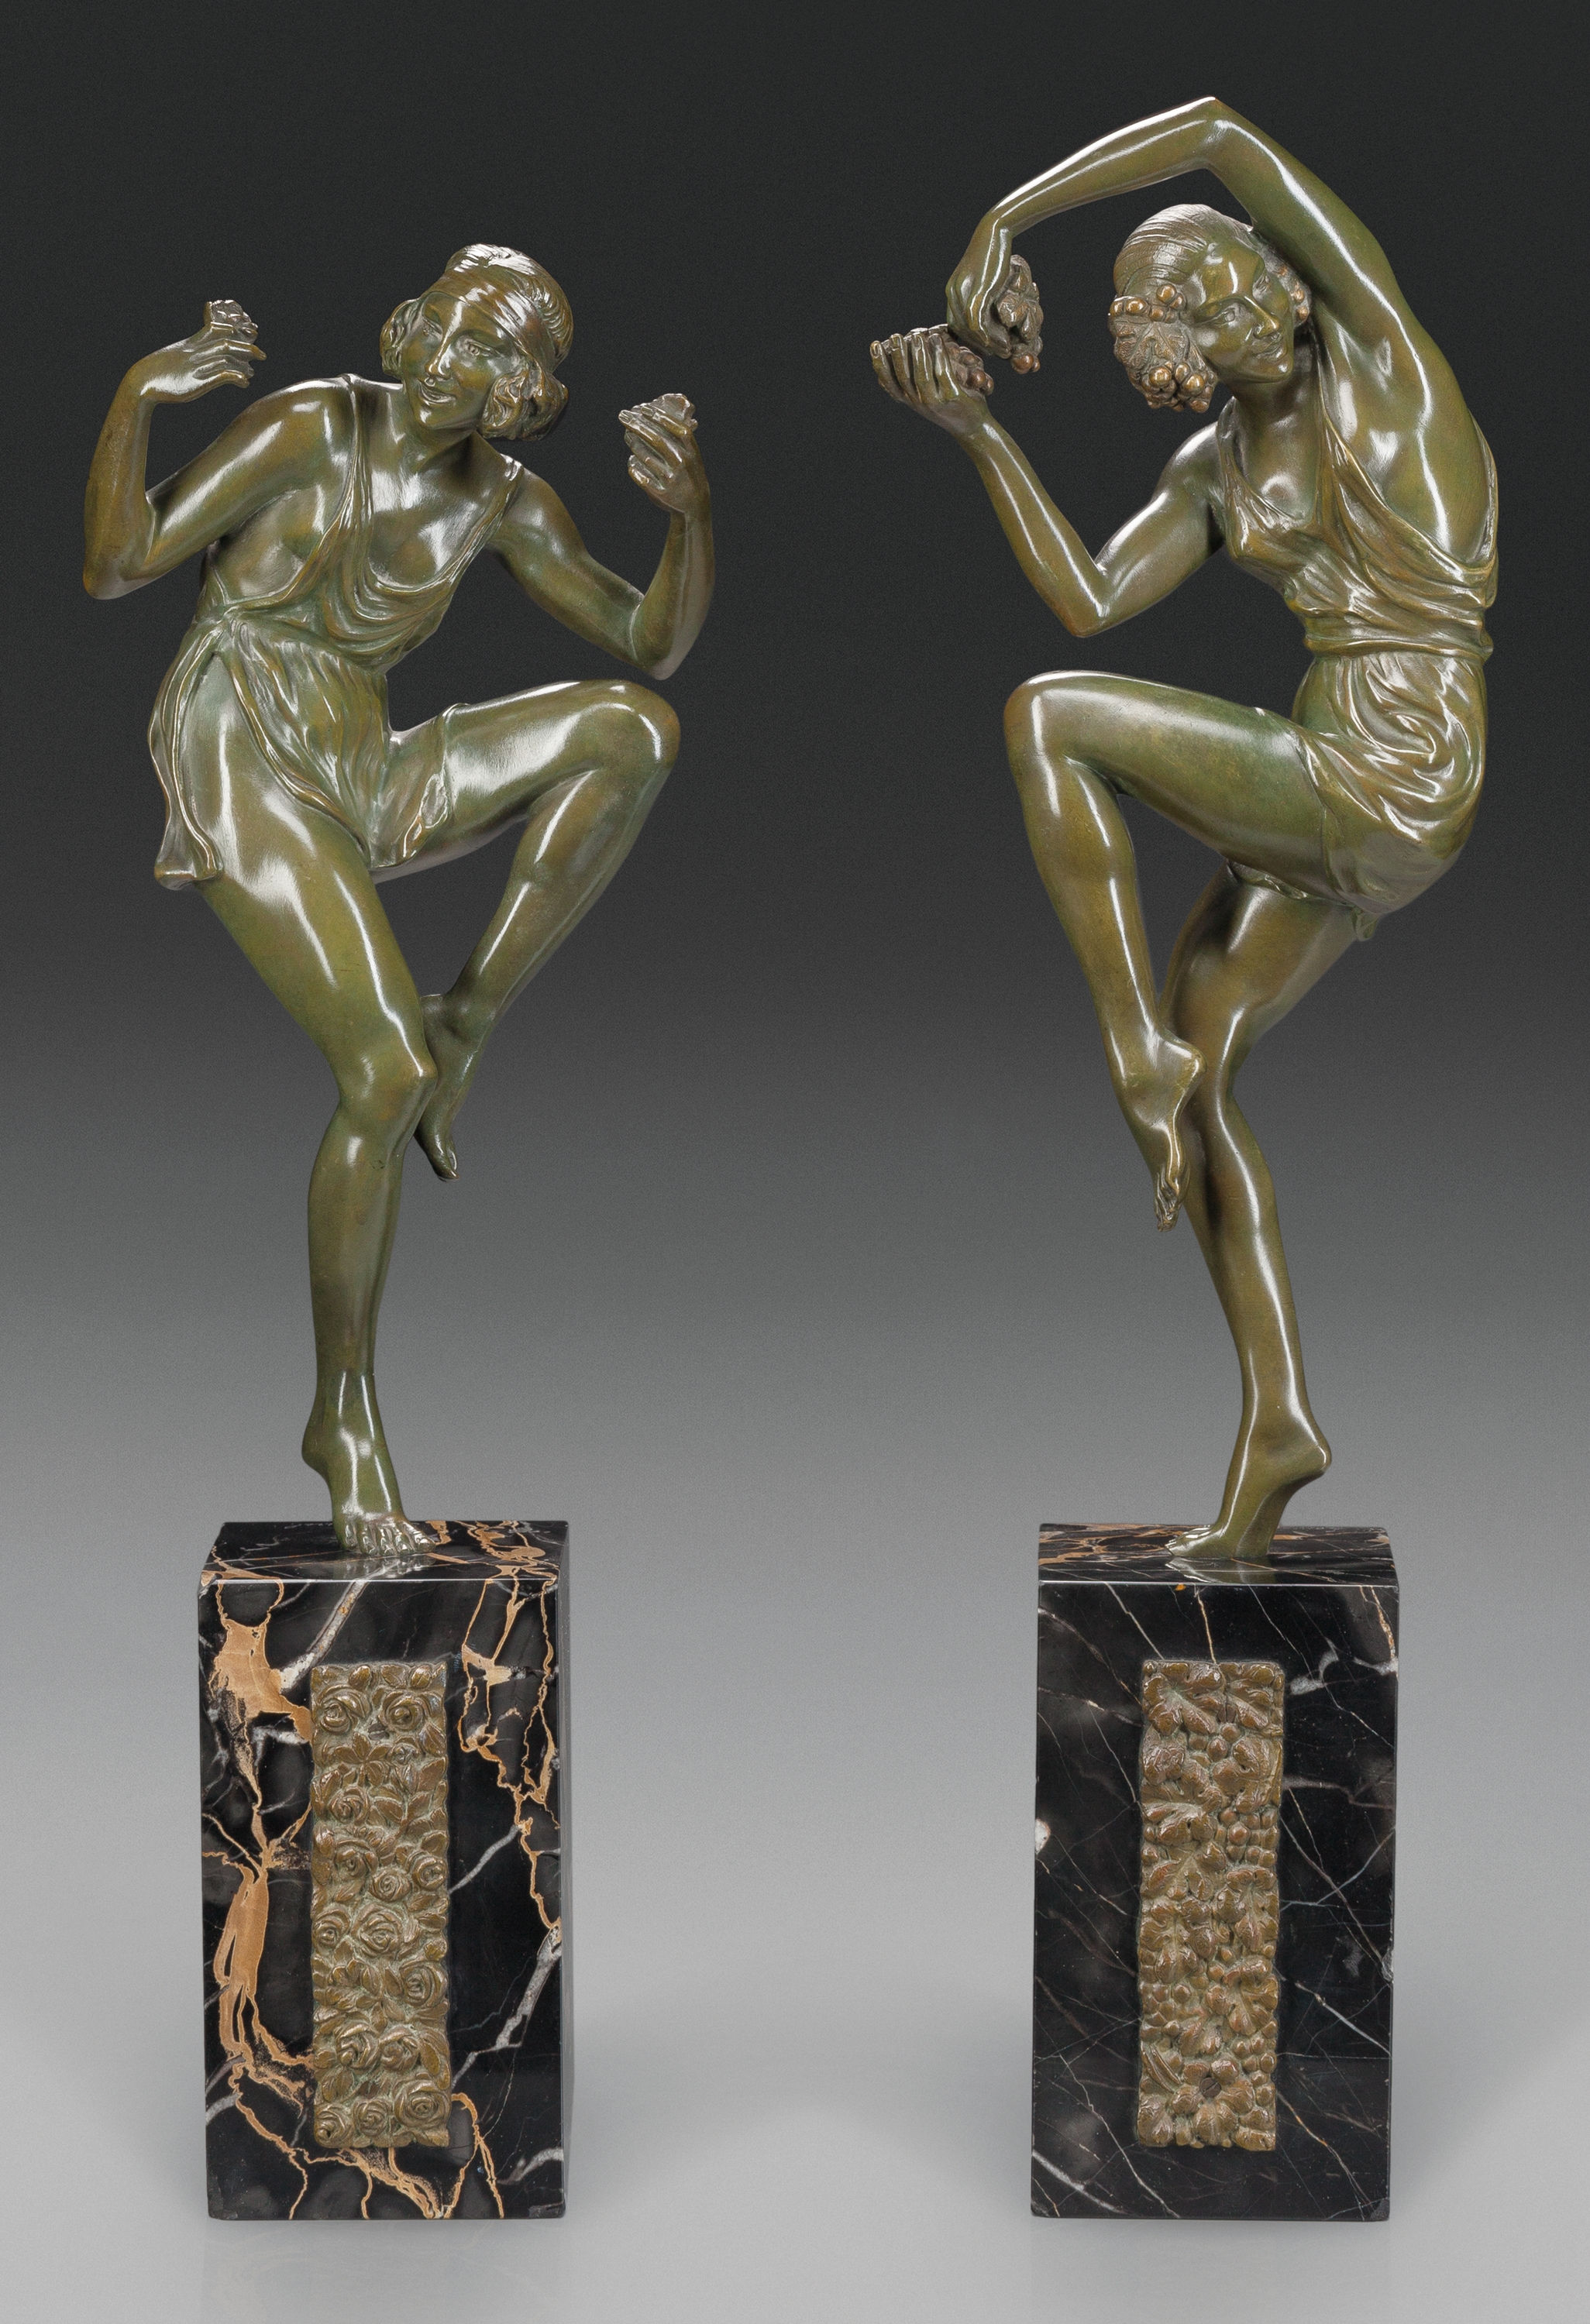 From the estate of Richard Wright is this pair of Art Deco bronze dancers by Pierre Laurel, 13 1/2 inches high on 6-inch marble bases (est. $4,000-$6,000). Heritage Auction image